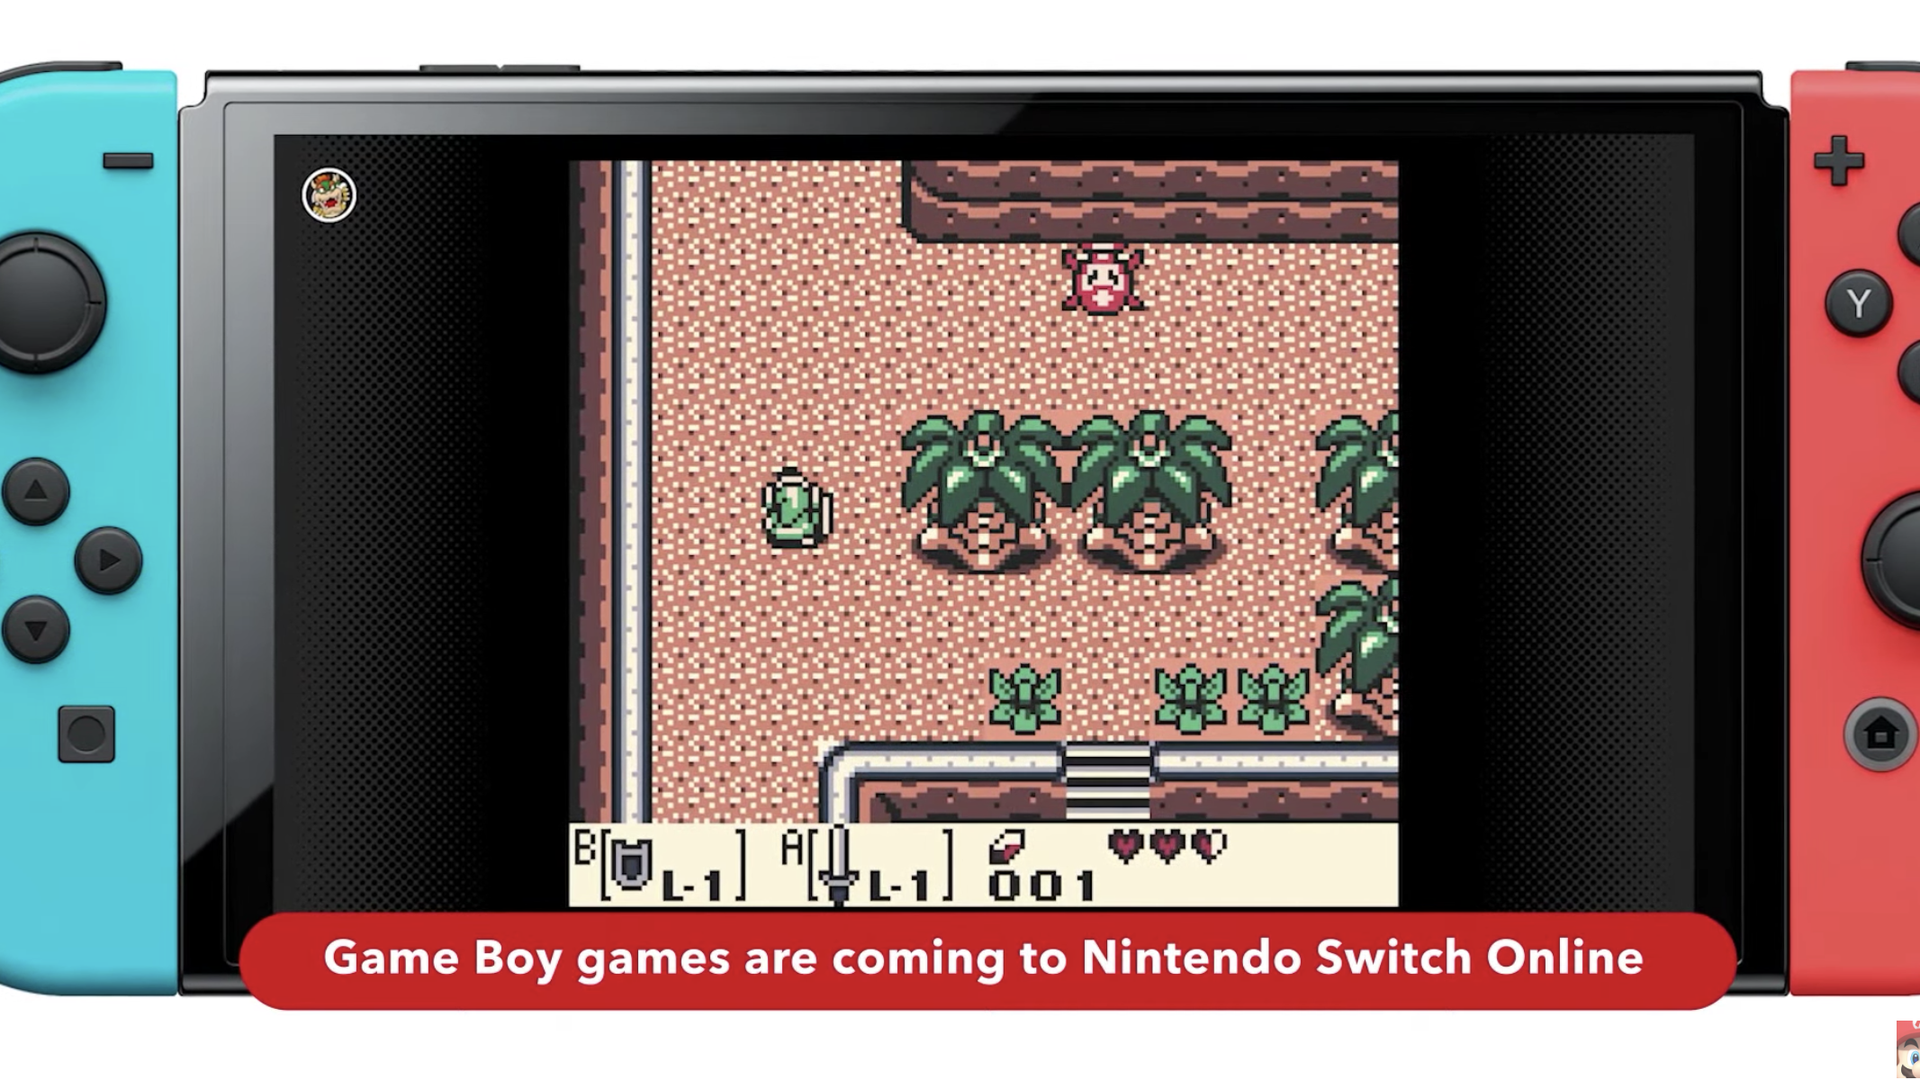 Image of a Nintendo Switch running a Game Boy game